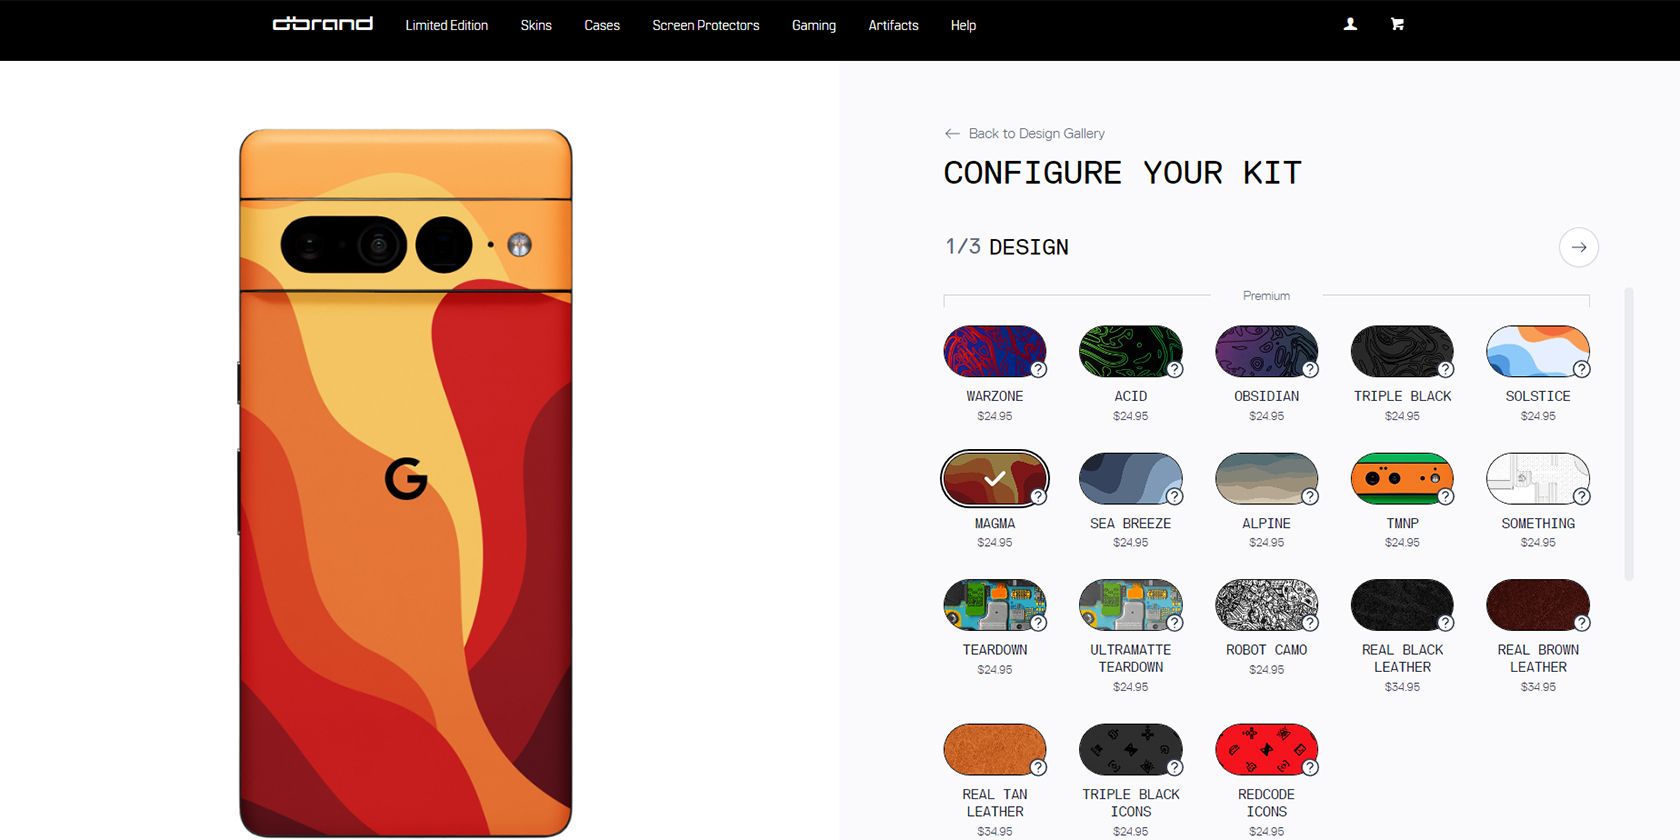 Customizing a Dbrand skin for a Pixel smartphone